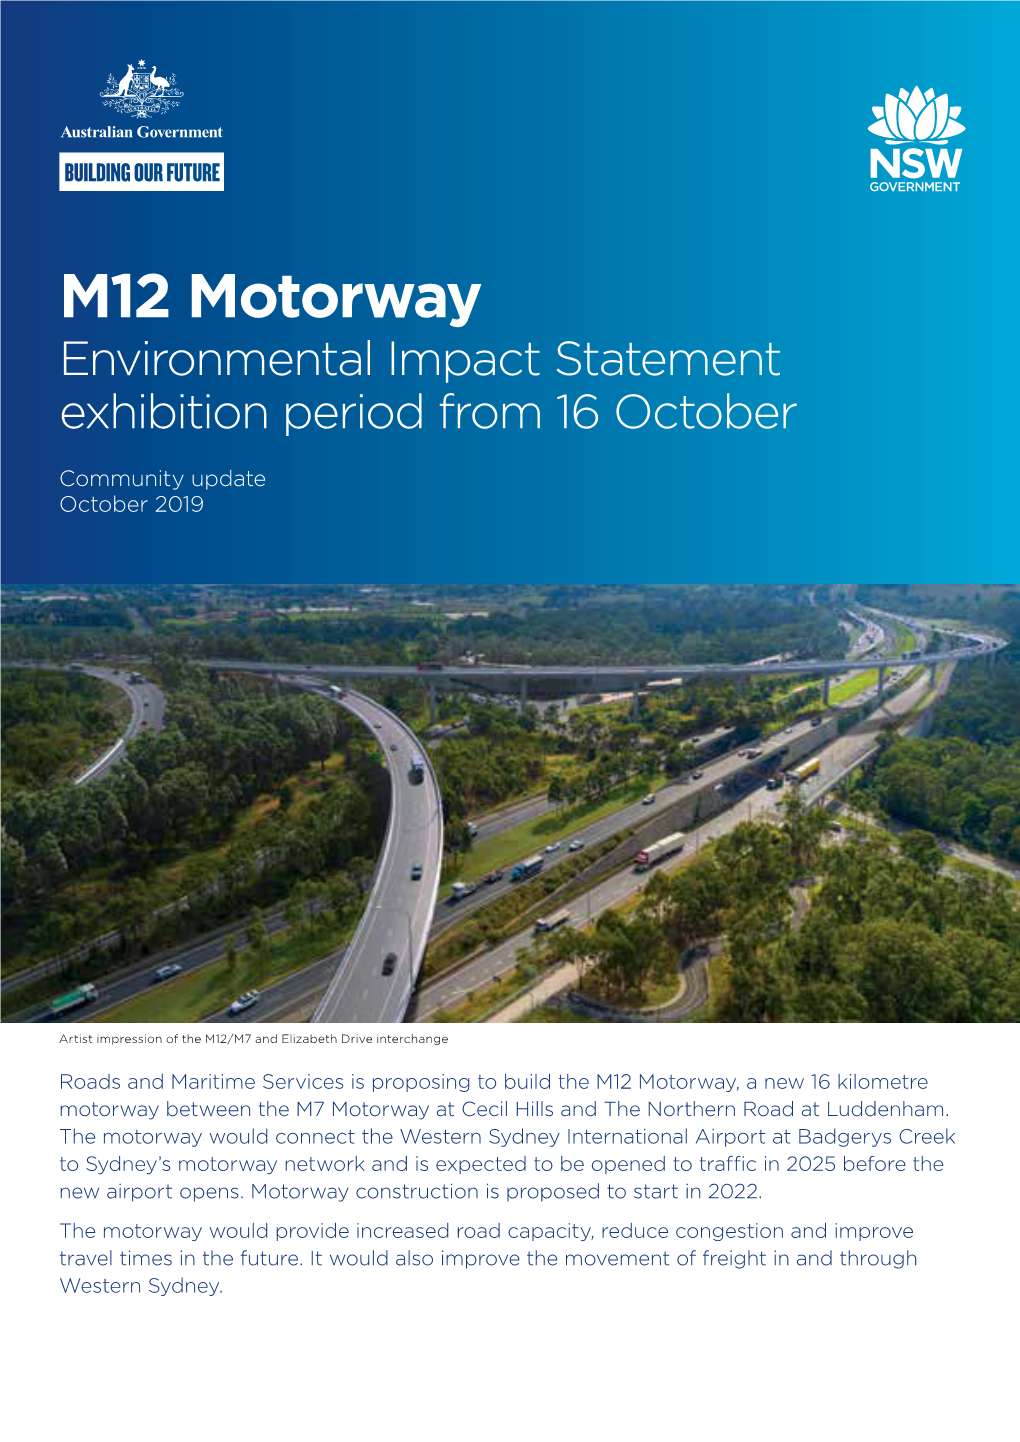 M12 Motorway Environmental Impact Statement Exhibition Period from 16 October